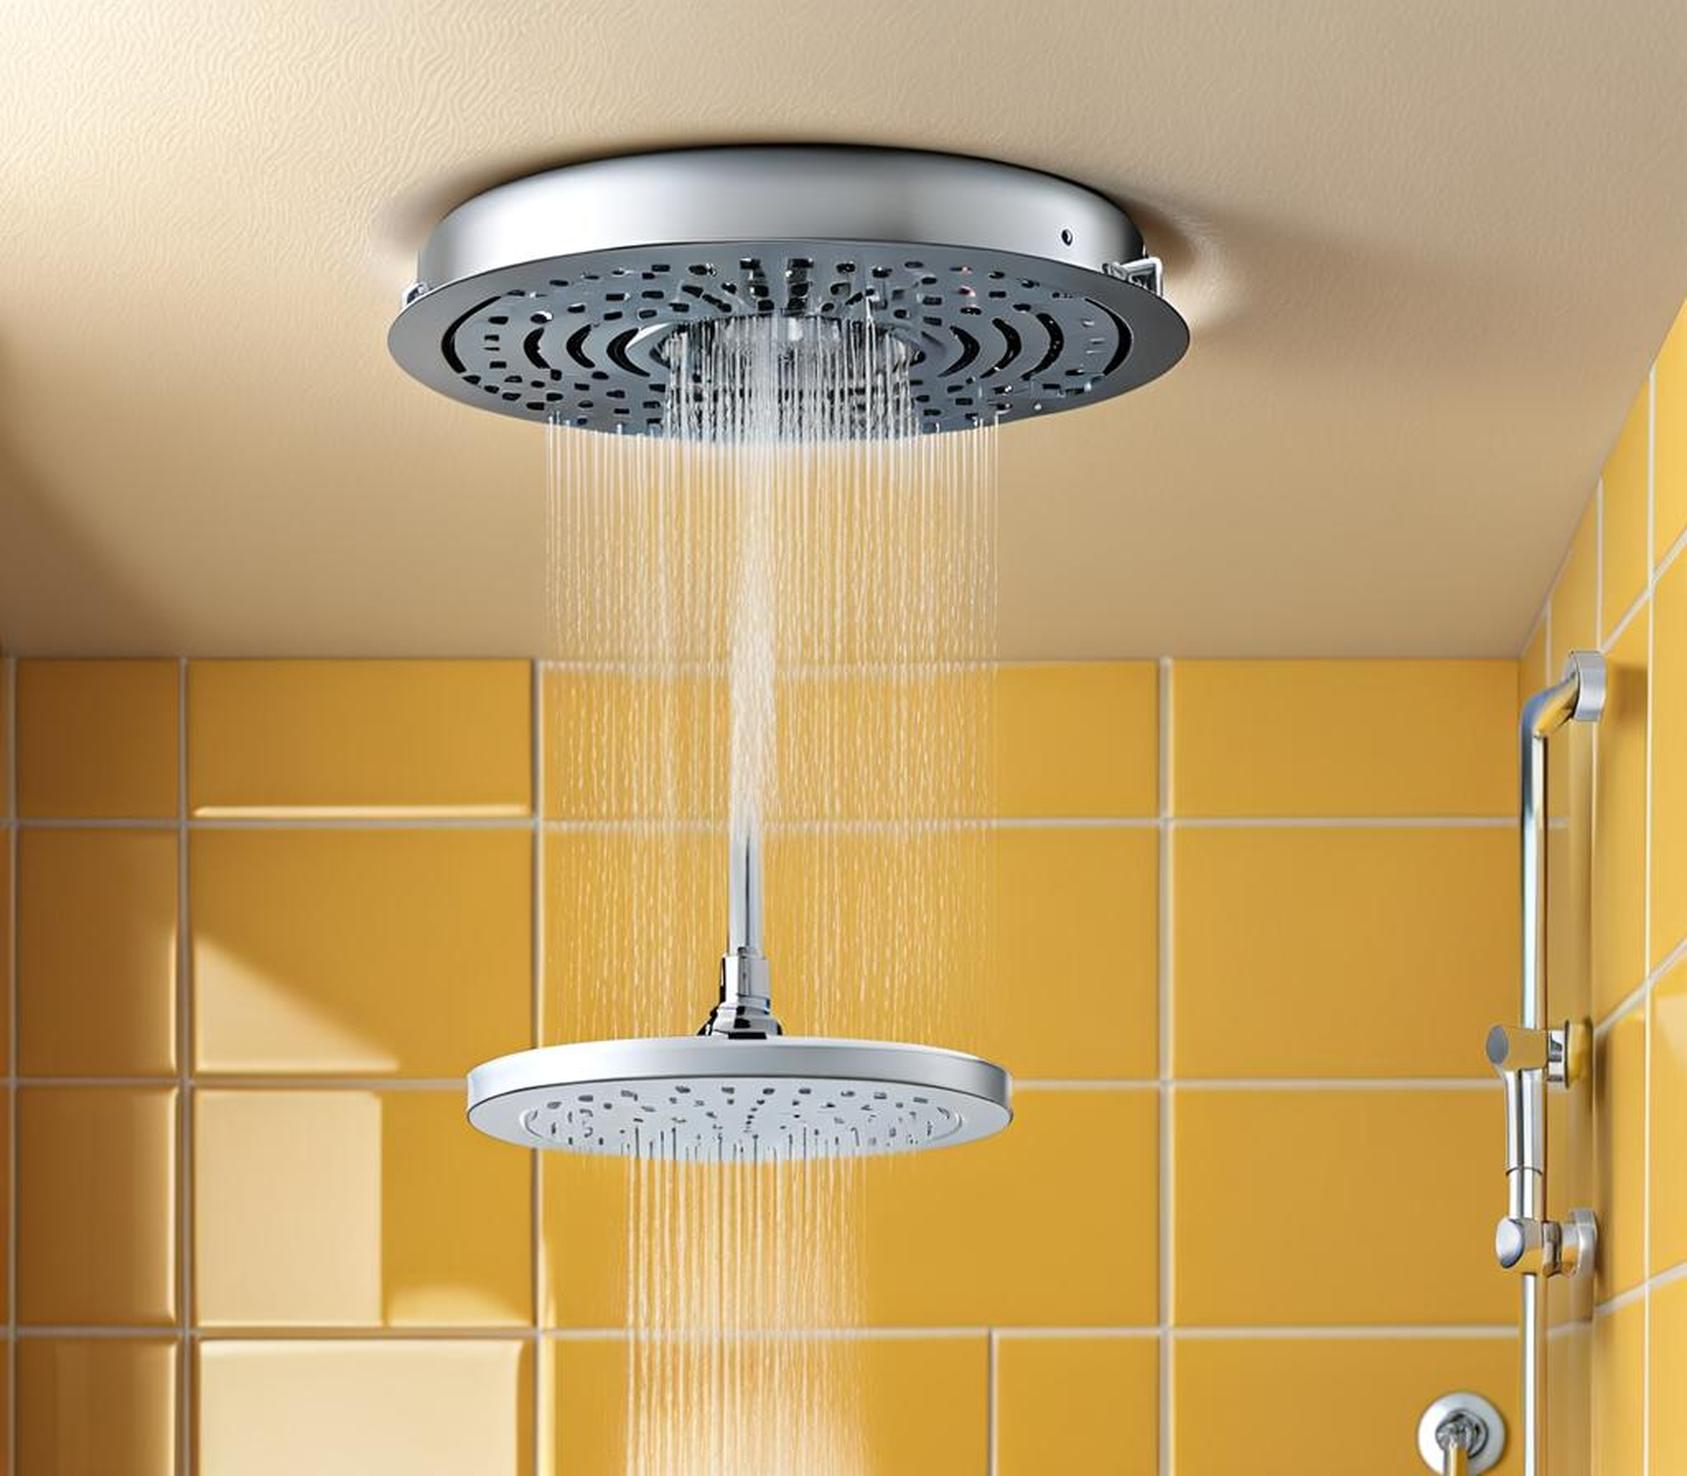 Leaky Pipe Causing Ceiling Damage? Tips to Find and Repair Shower Drain Leaks